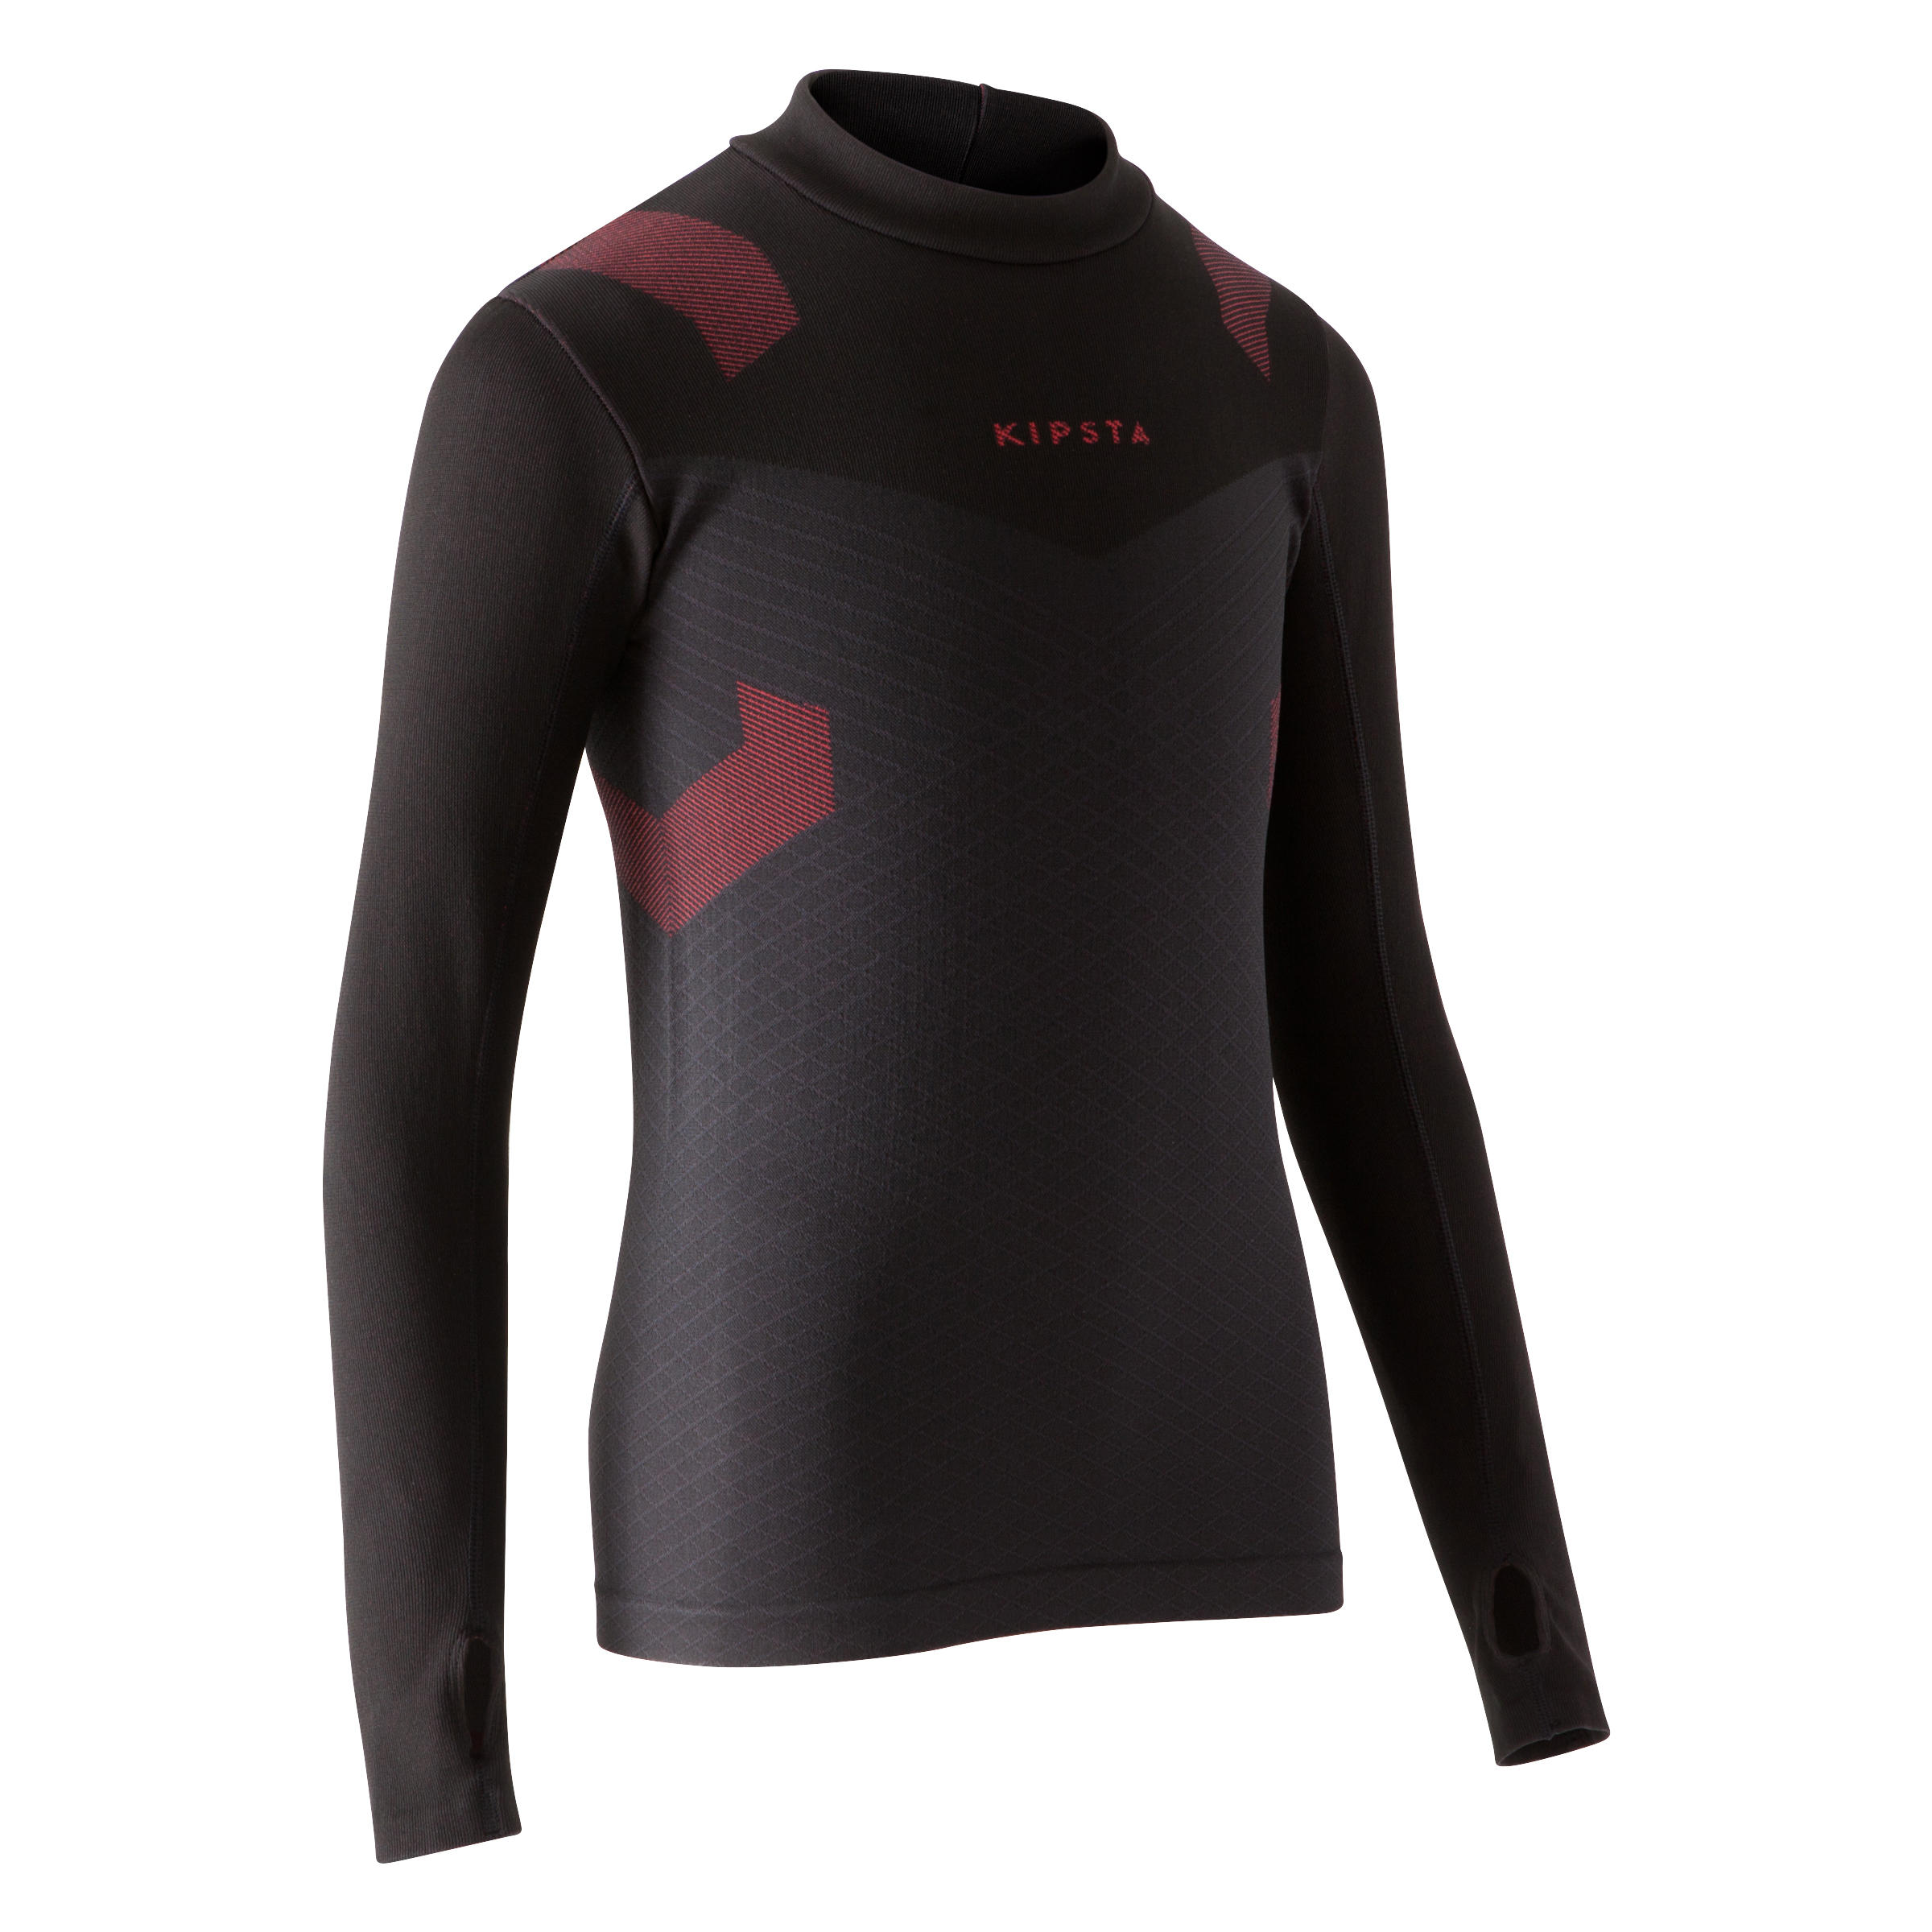 KIPSTA Keepdry 900 Kids' Warm Breathable Long-Sleeved Base Layer - Black/Red